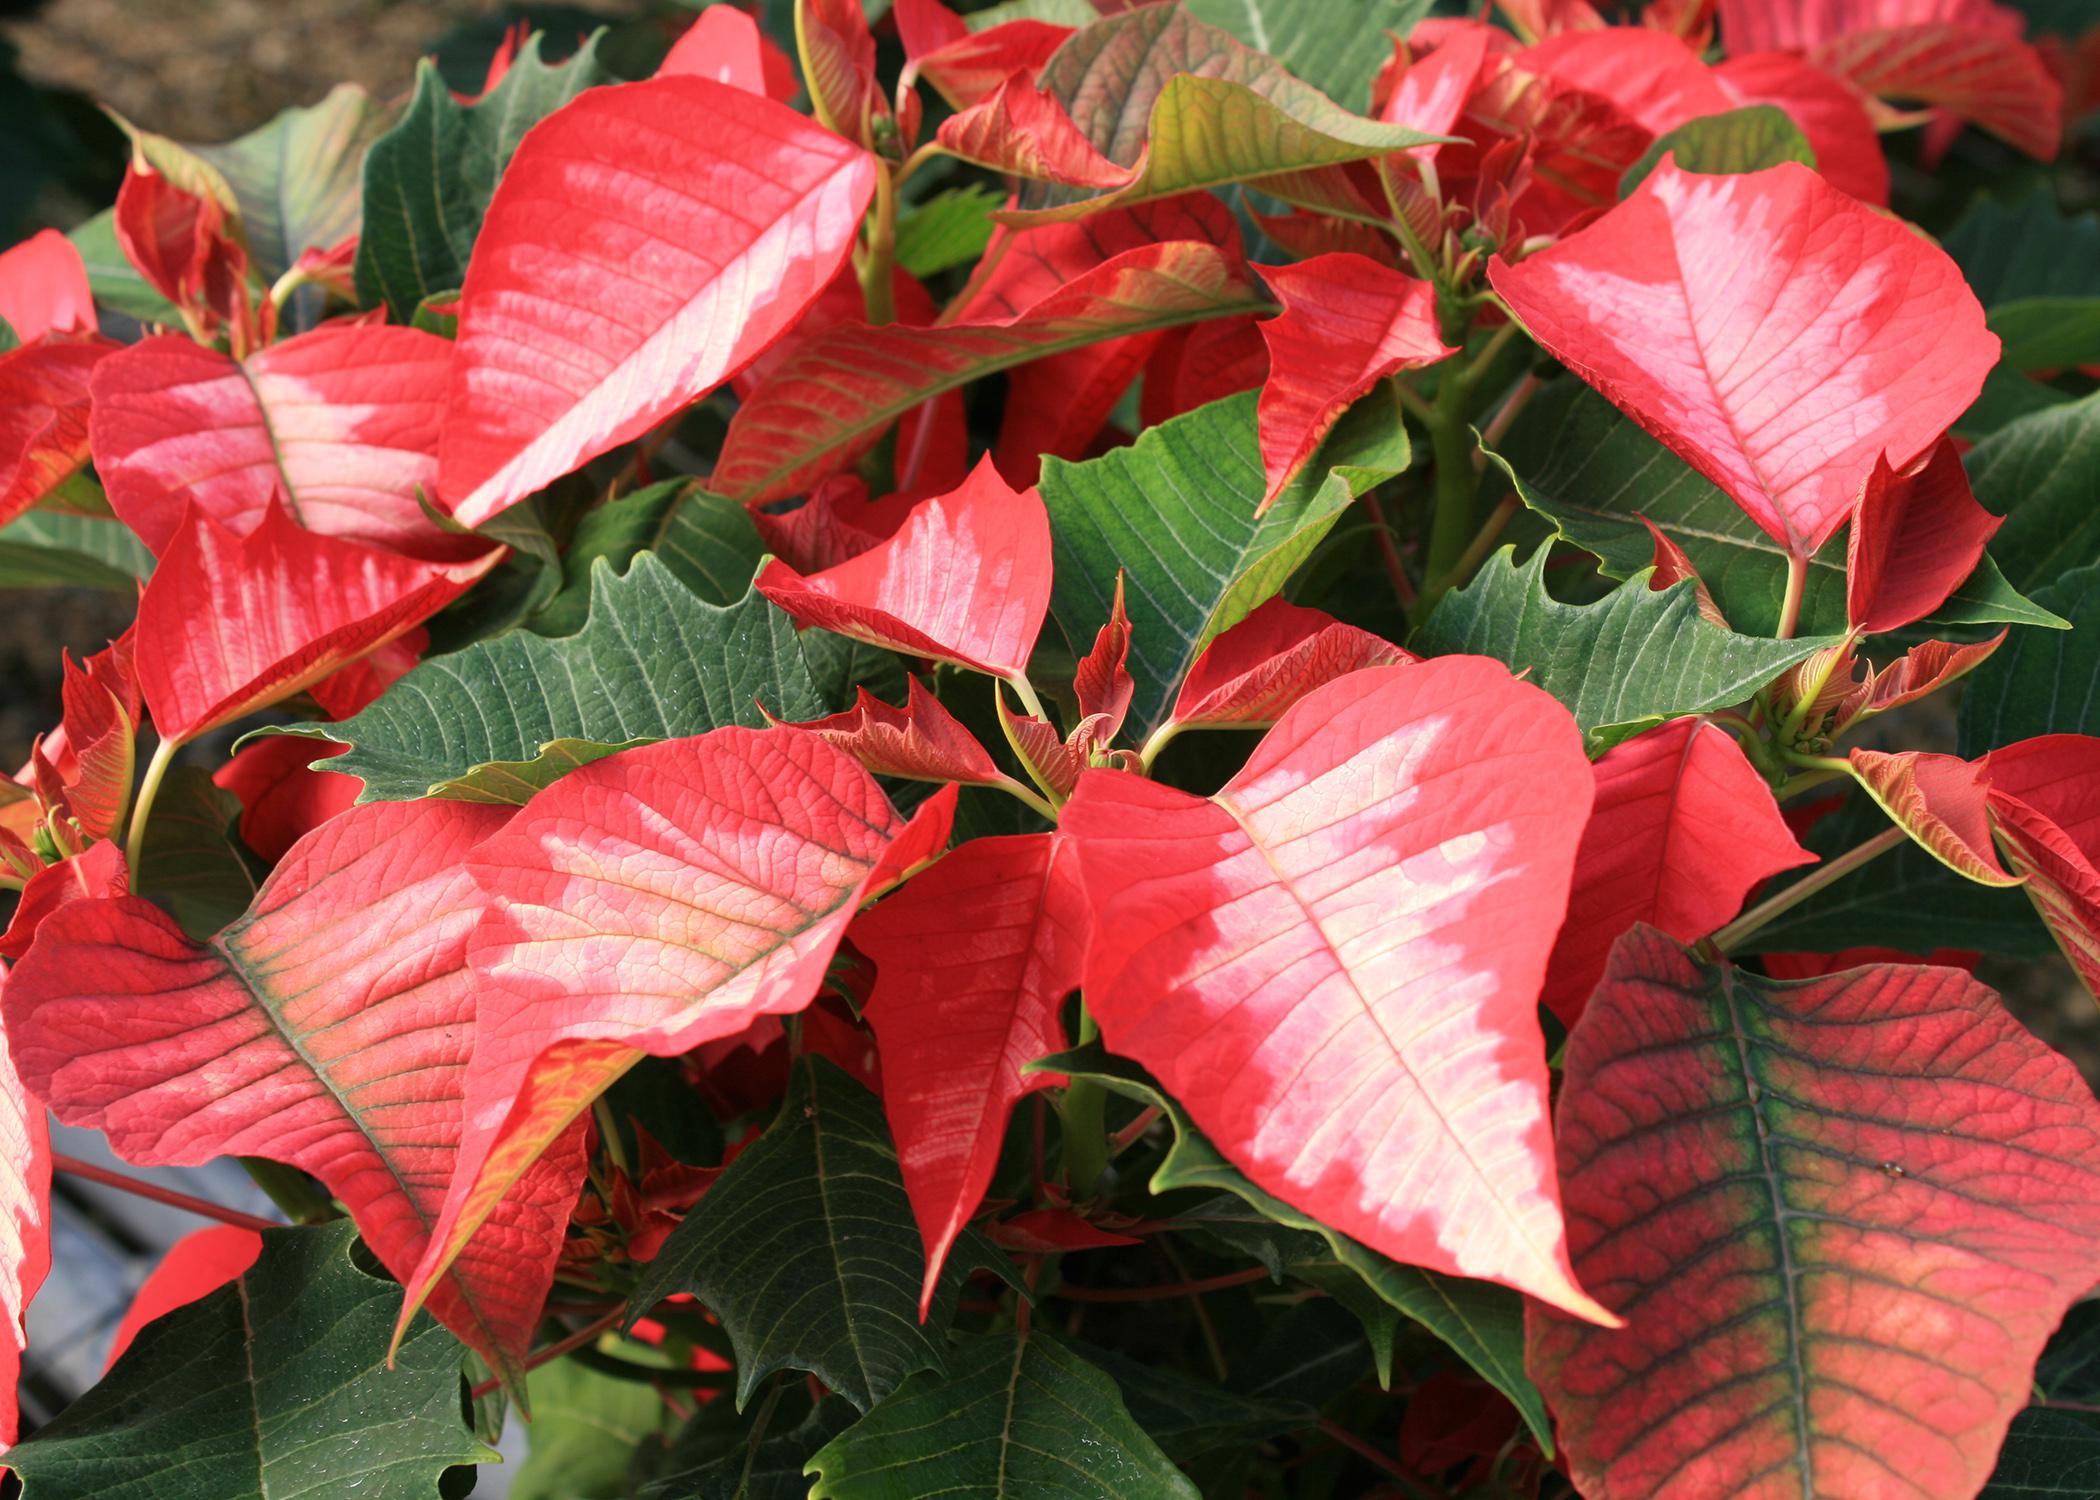 Poinsettias such as this Ice Punch selection are part of the expected scenery and decorations of Christmas. They come in a wide variety of colors and styles, and with a little care, they can last past the holiday season. (Photo by MSU Extension Service/Gary Bachman)